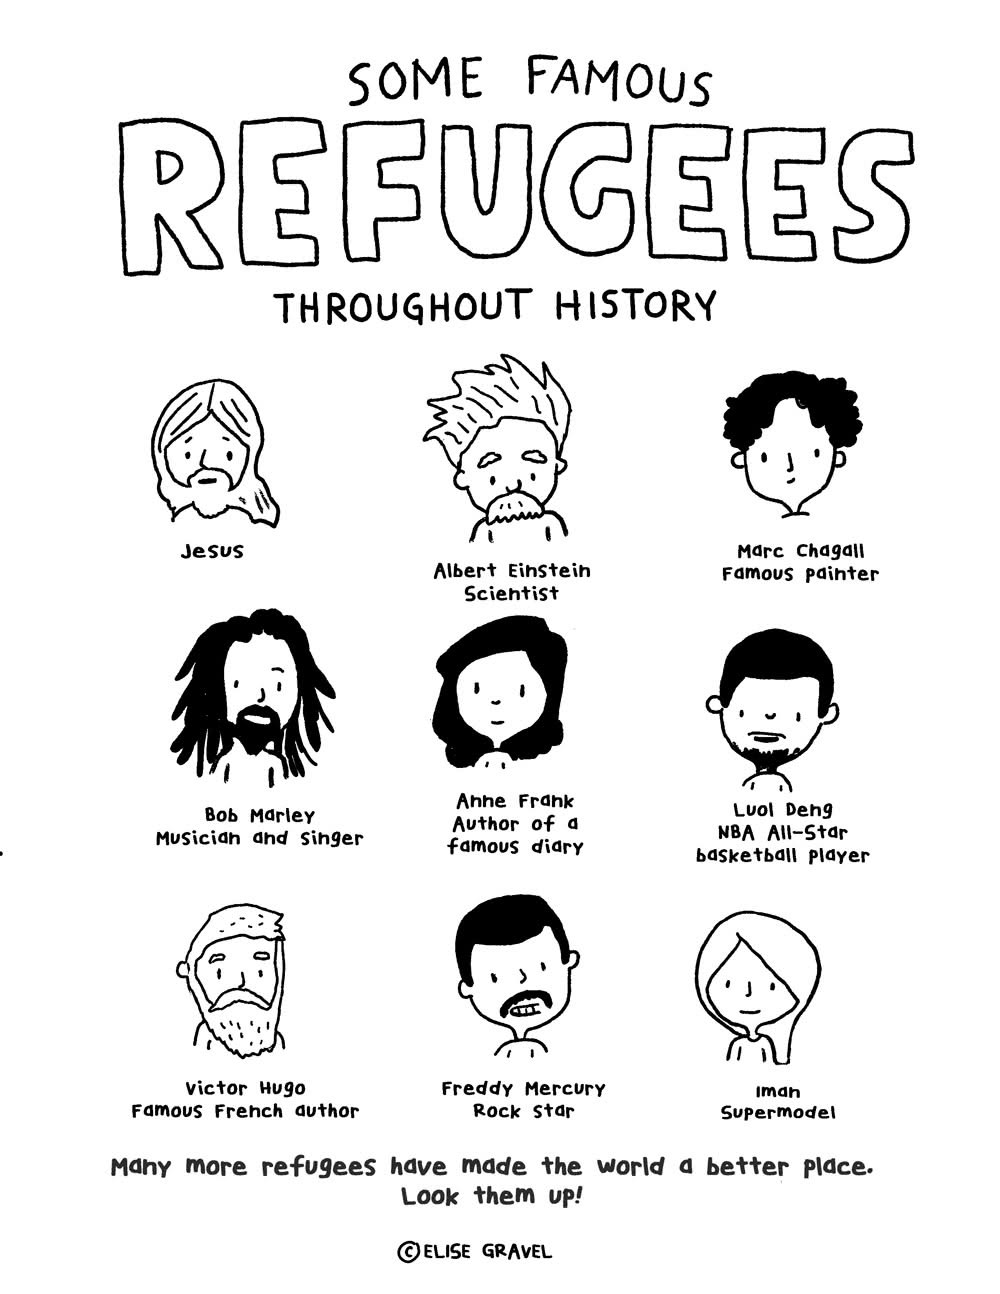 Some famous refugees